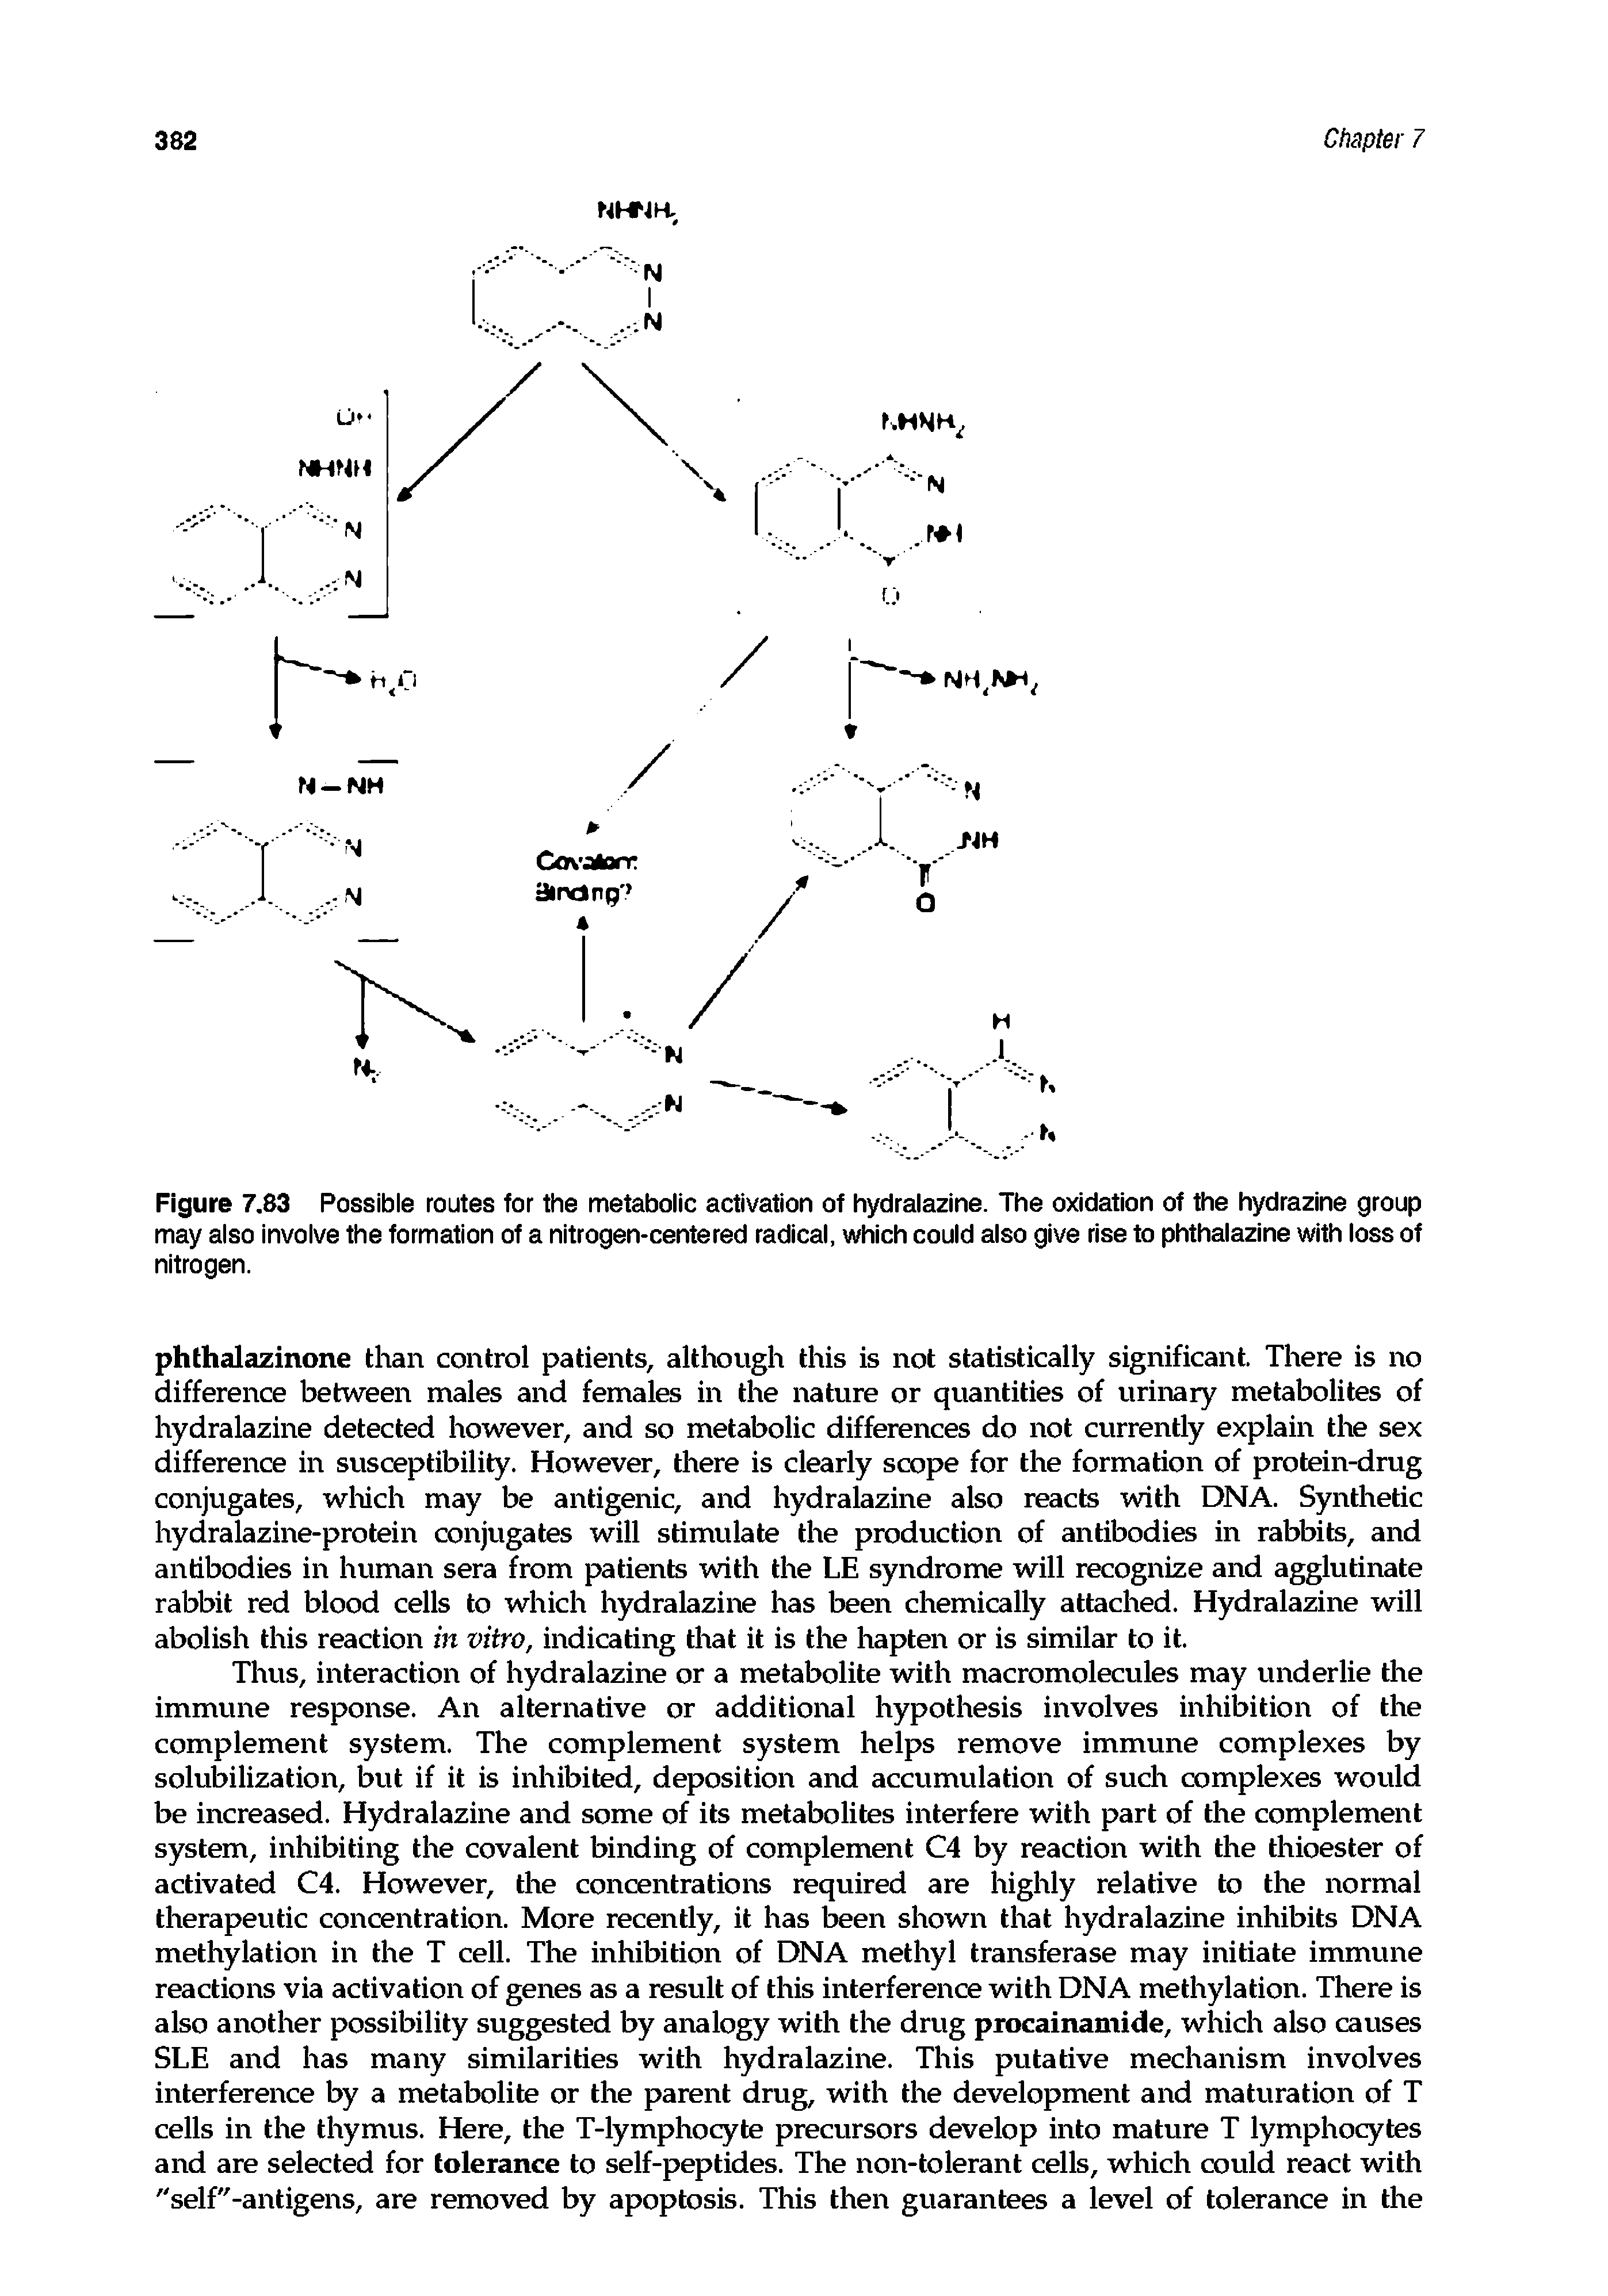 Figure 7.83 Possible routes for the metabolic activation of hydralazine. The oxidation of the hydrazine group may also involve the formation of a nitrogen-centered radical, which could also give rise to phthalazine with loss of nitrogen.